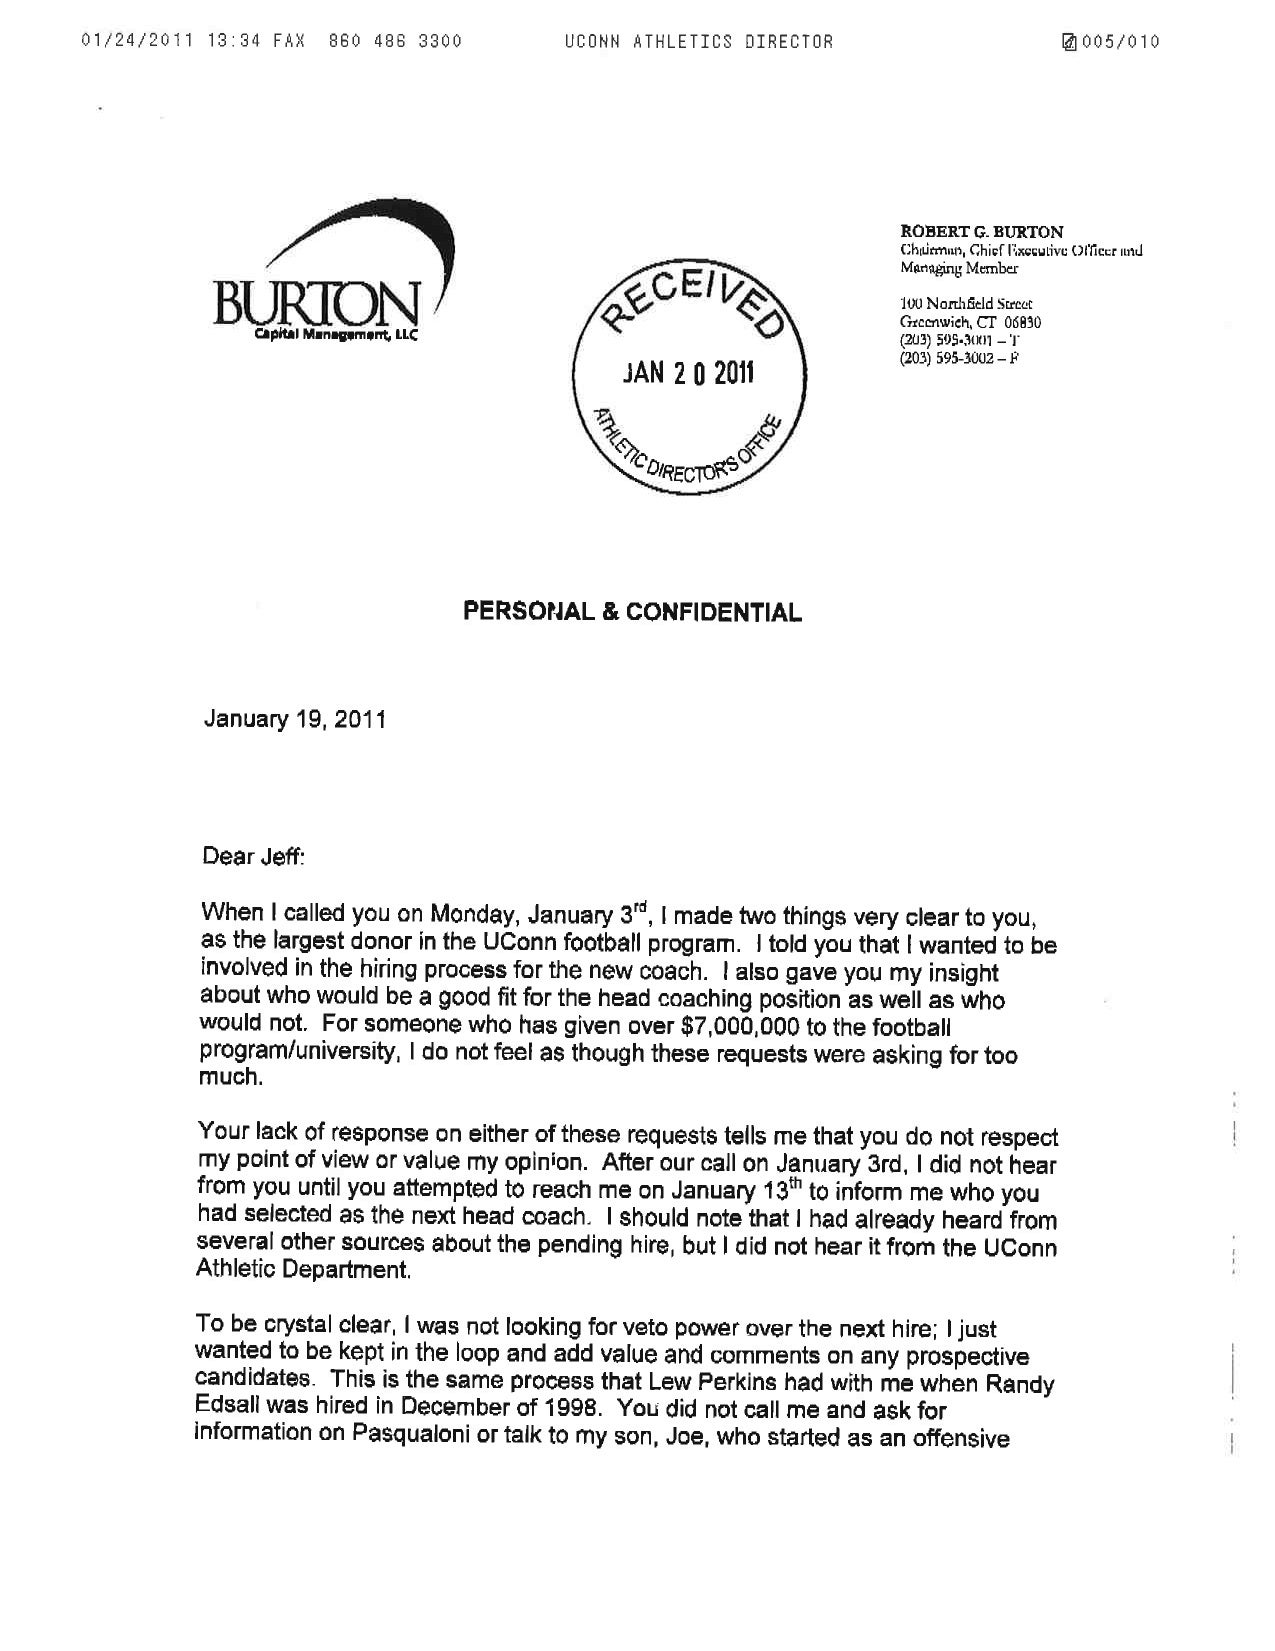 here 39 s the angry letter that uconn donor wrote demanding